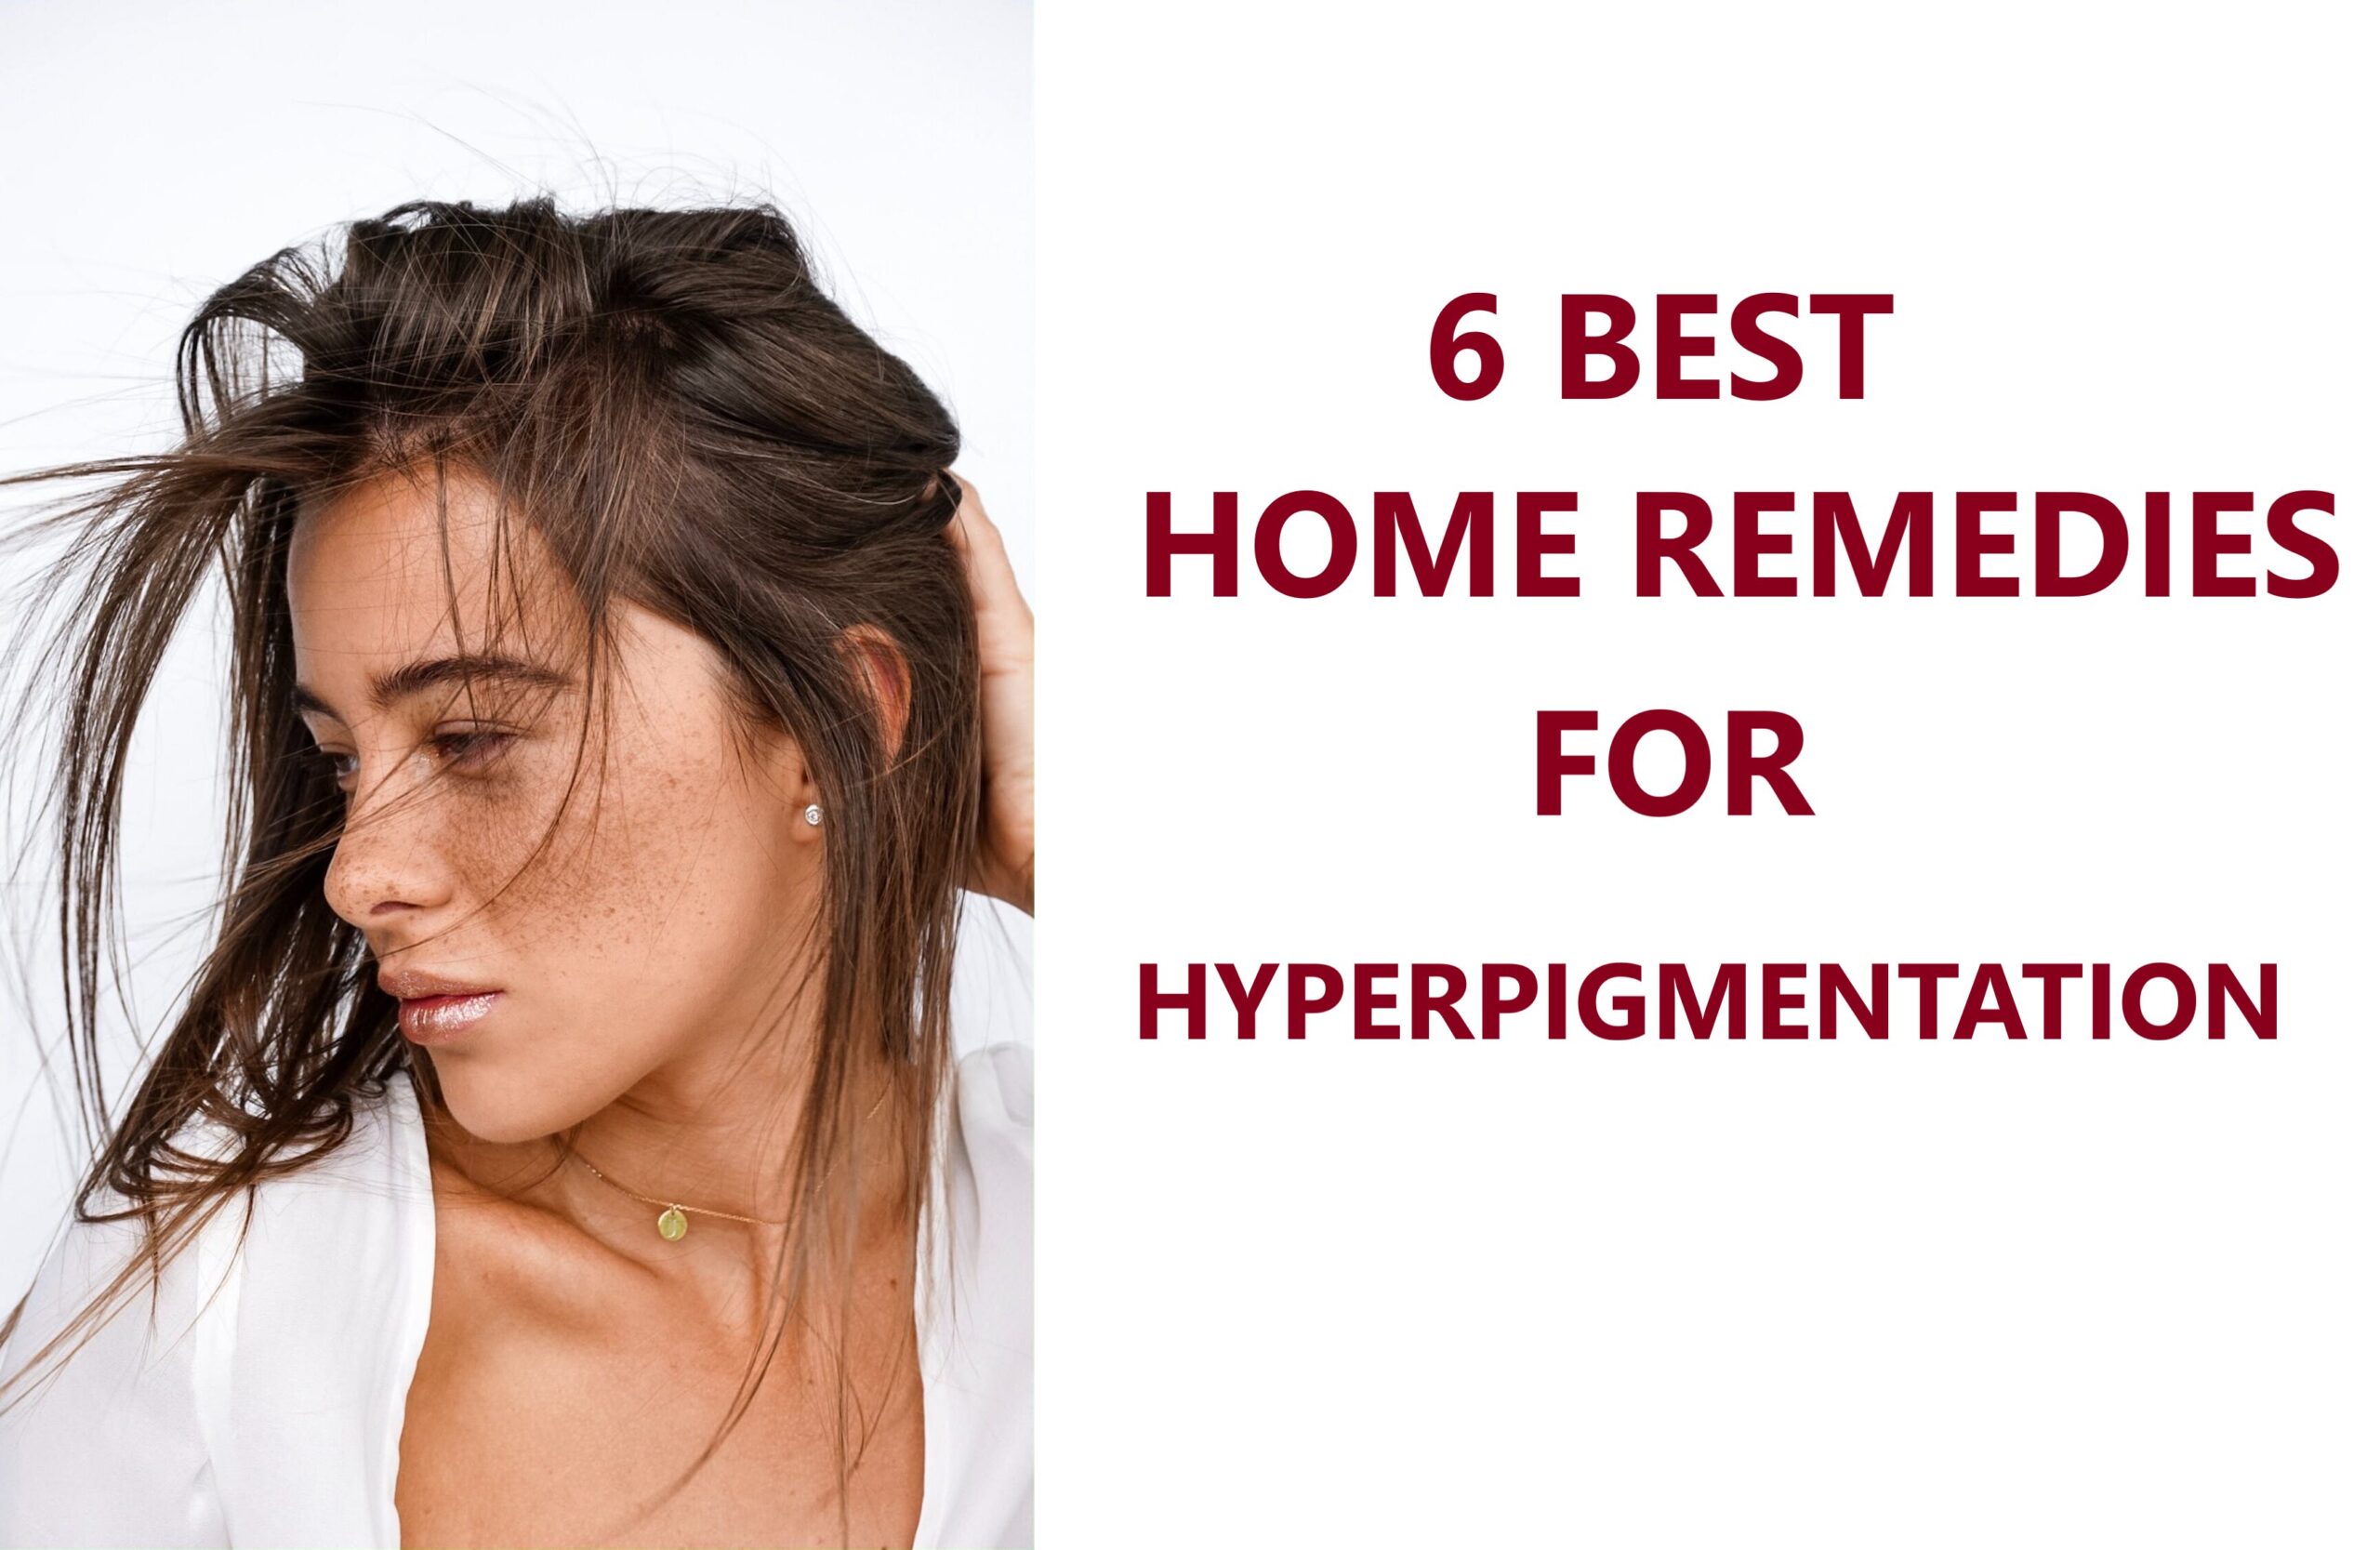 Home remedies for hyperpigmentation